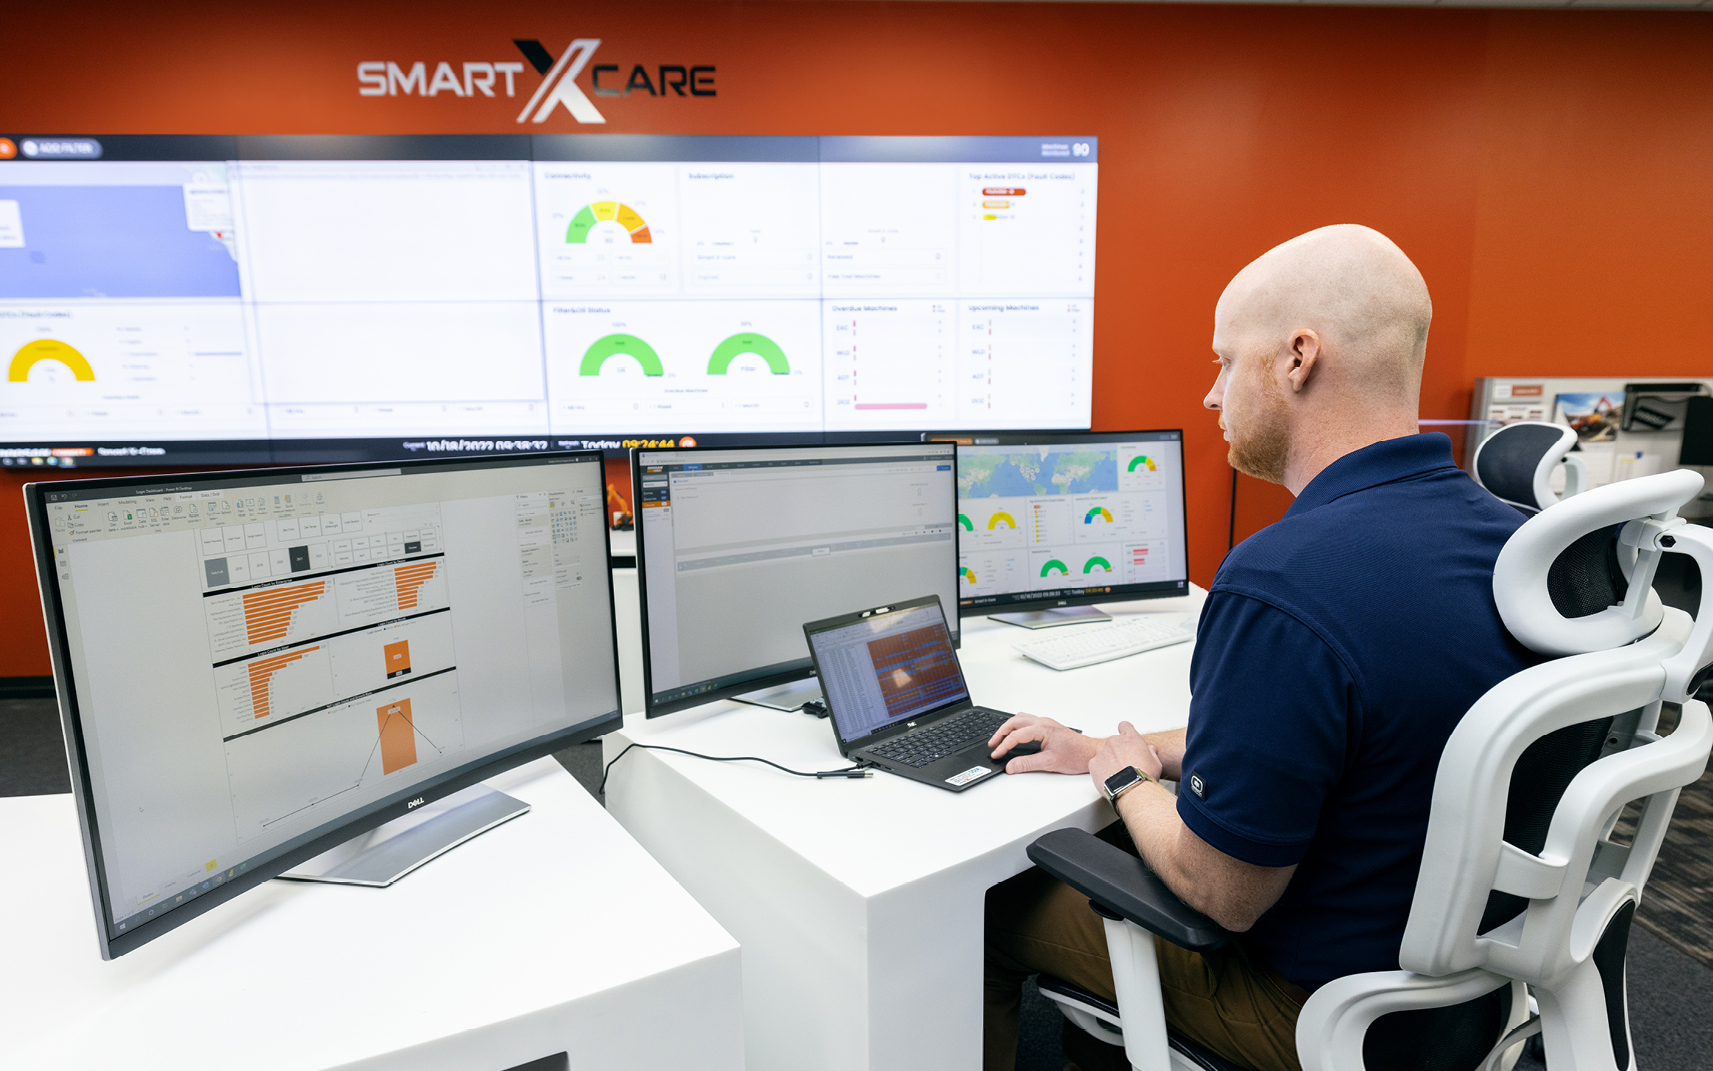 A DEVELON telematics manager looks at equipment data on a screen